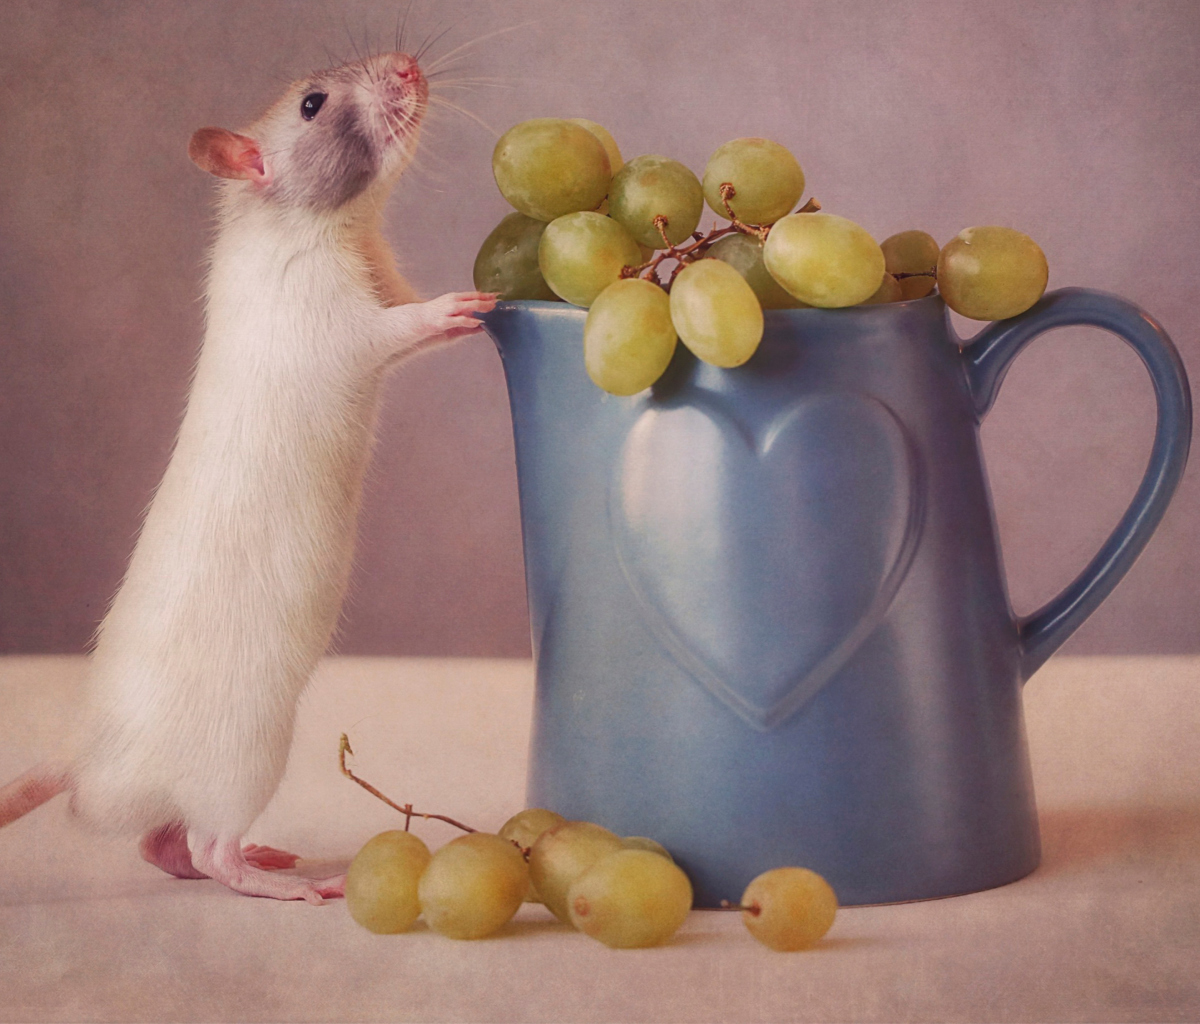 Mouse Loves Grapes wallpaper 1200x1024